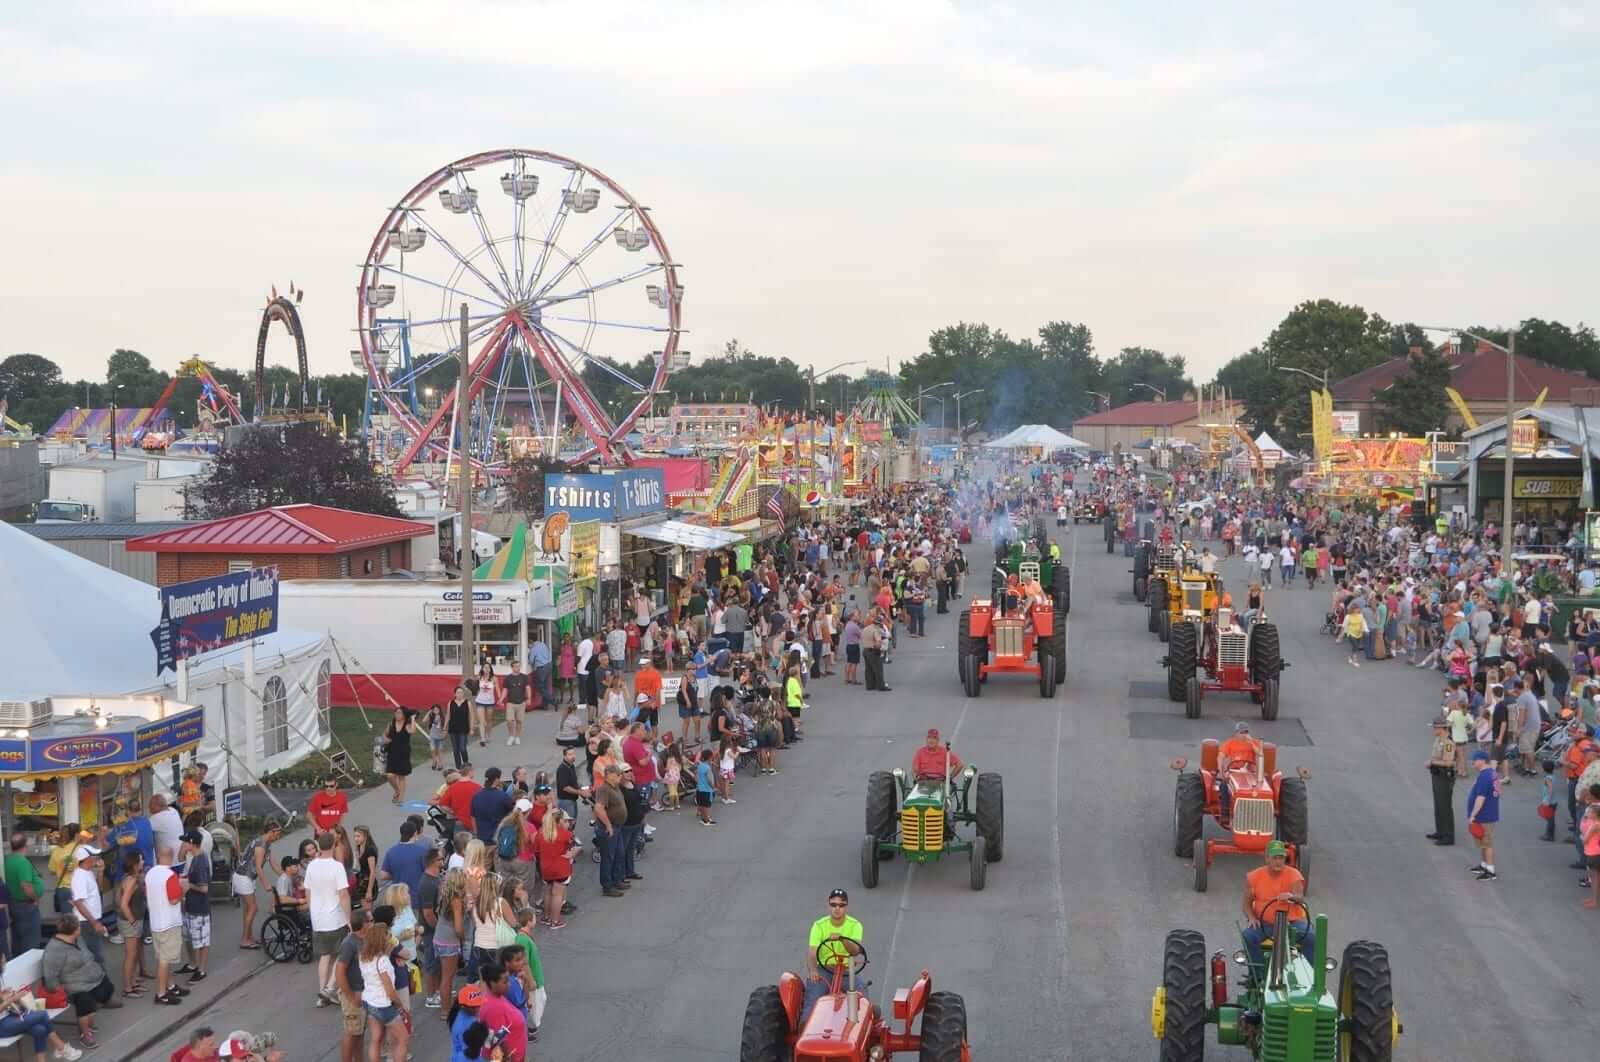 Illinois State Fair, 8/128/22 Go Country Events